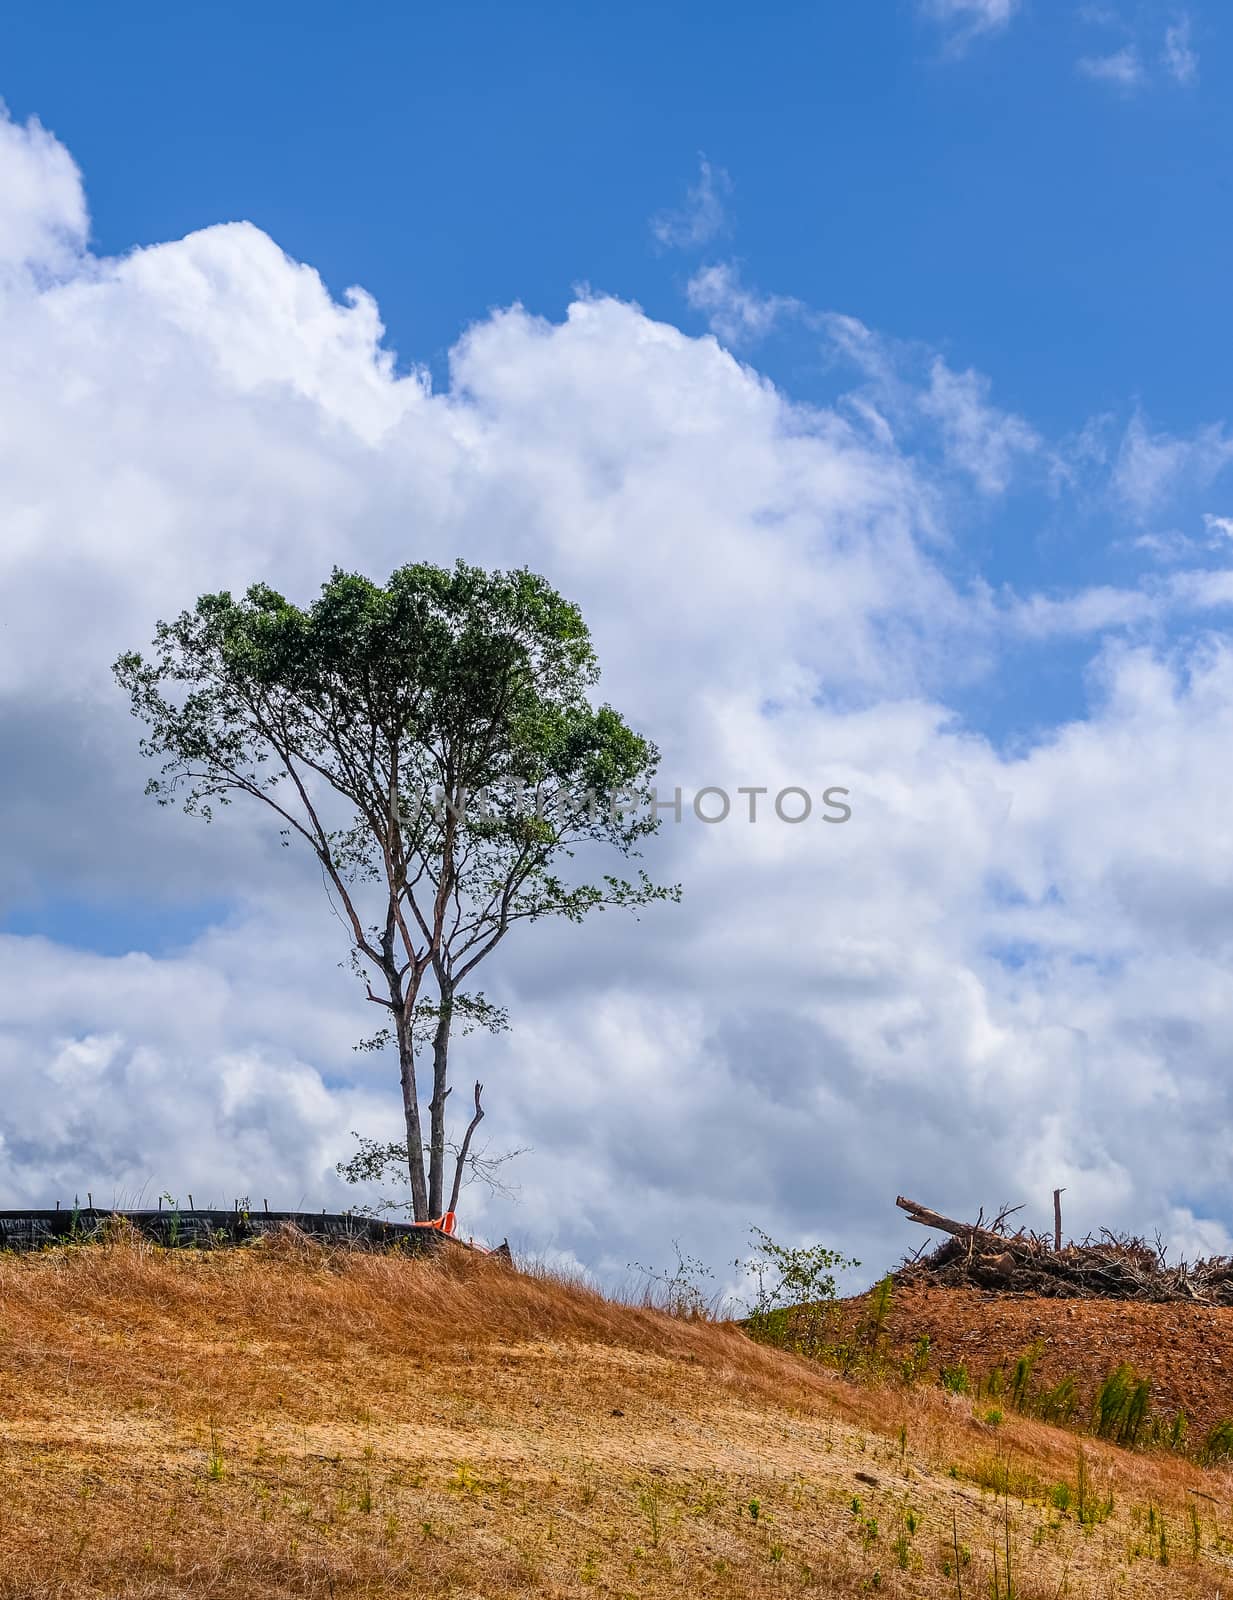 Lone Tree on a Construction Site by dbvirago